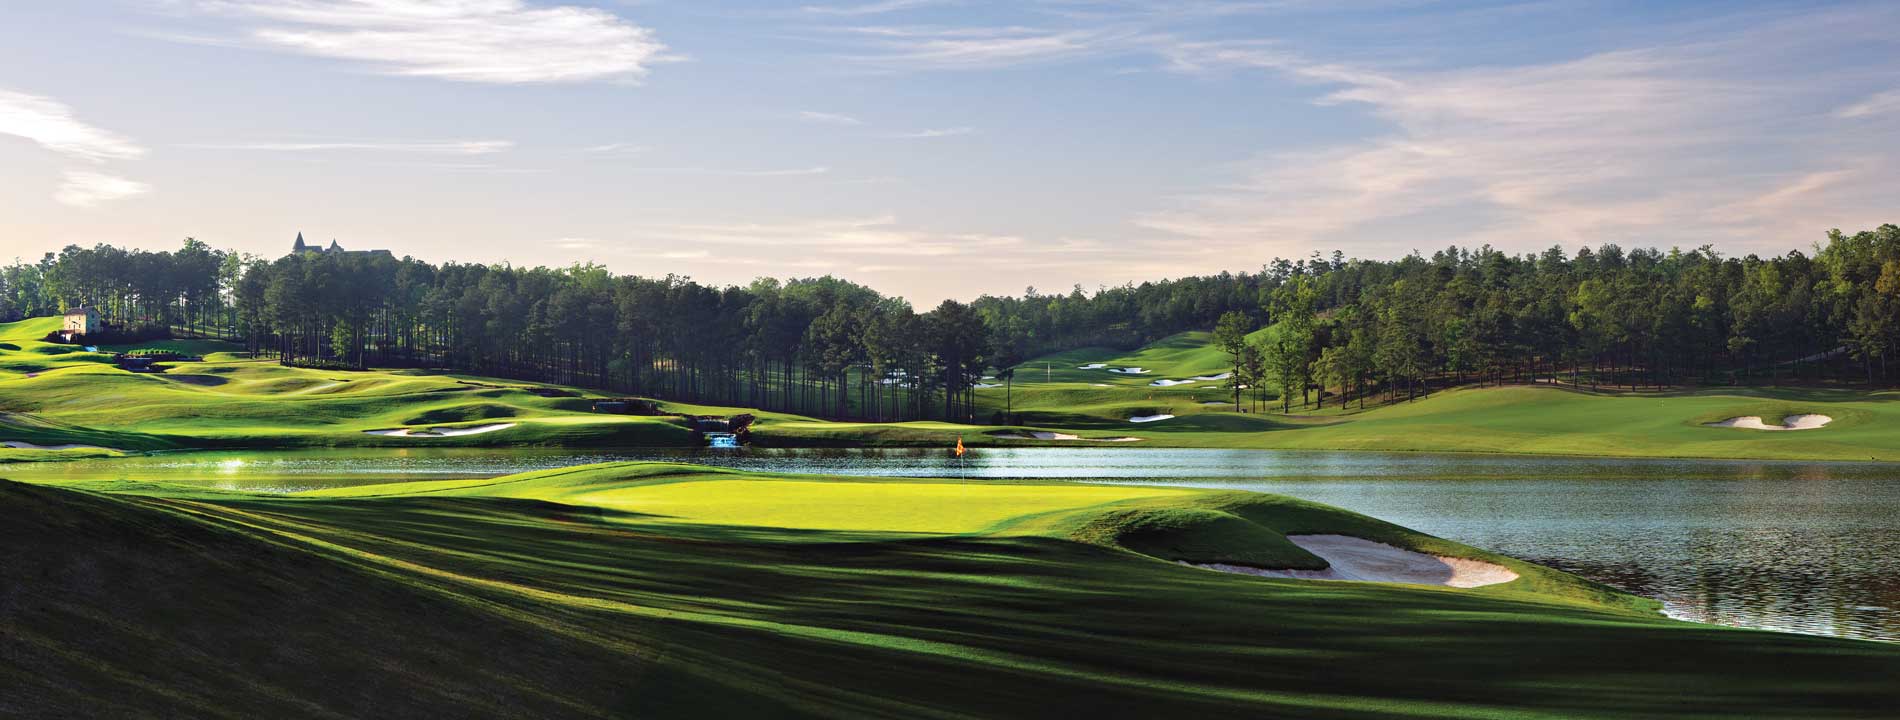 The idea of the first true American golf trail was born in Alabama with the Robert Trent Jones Golf Trail in the late 1980s, with Ross Bridge serving as one of its marquee courses.